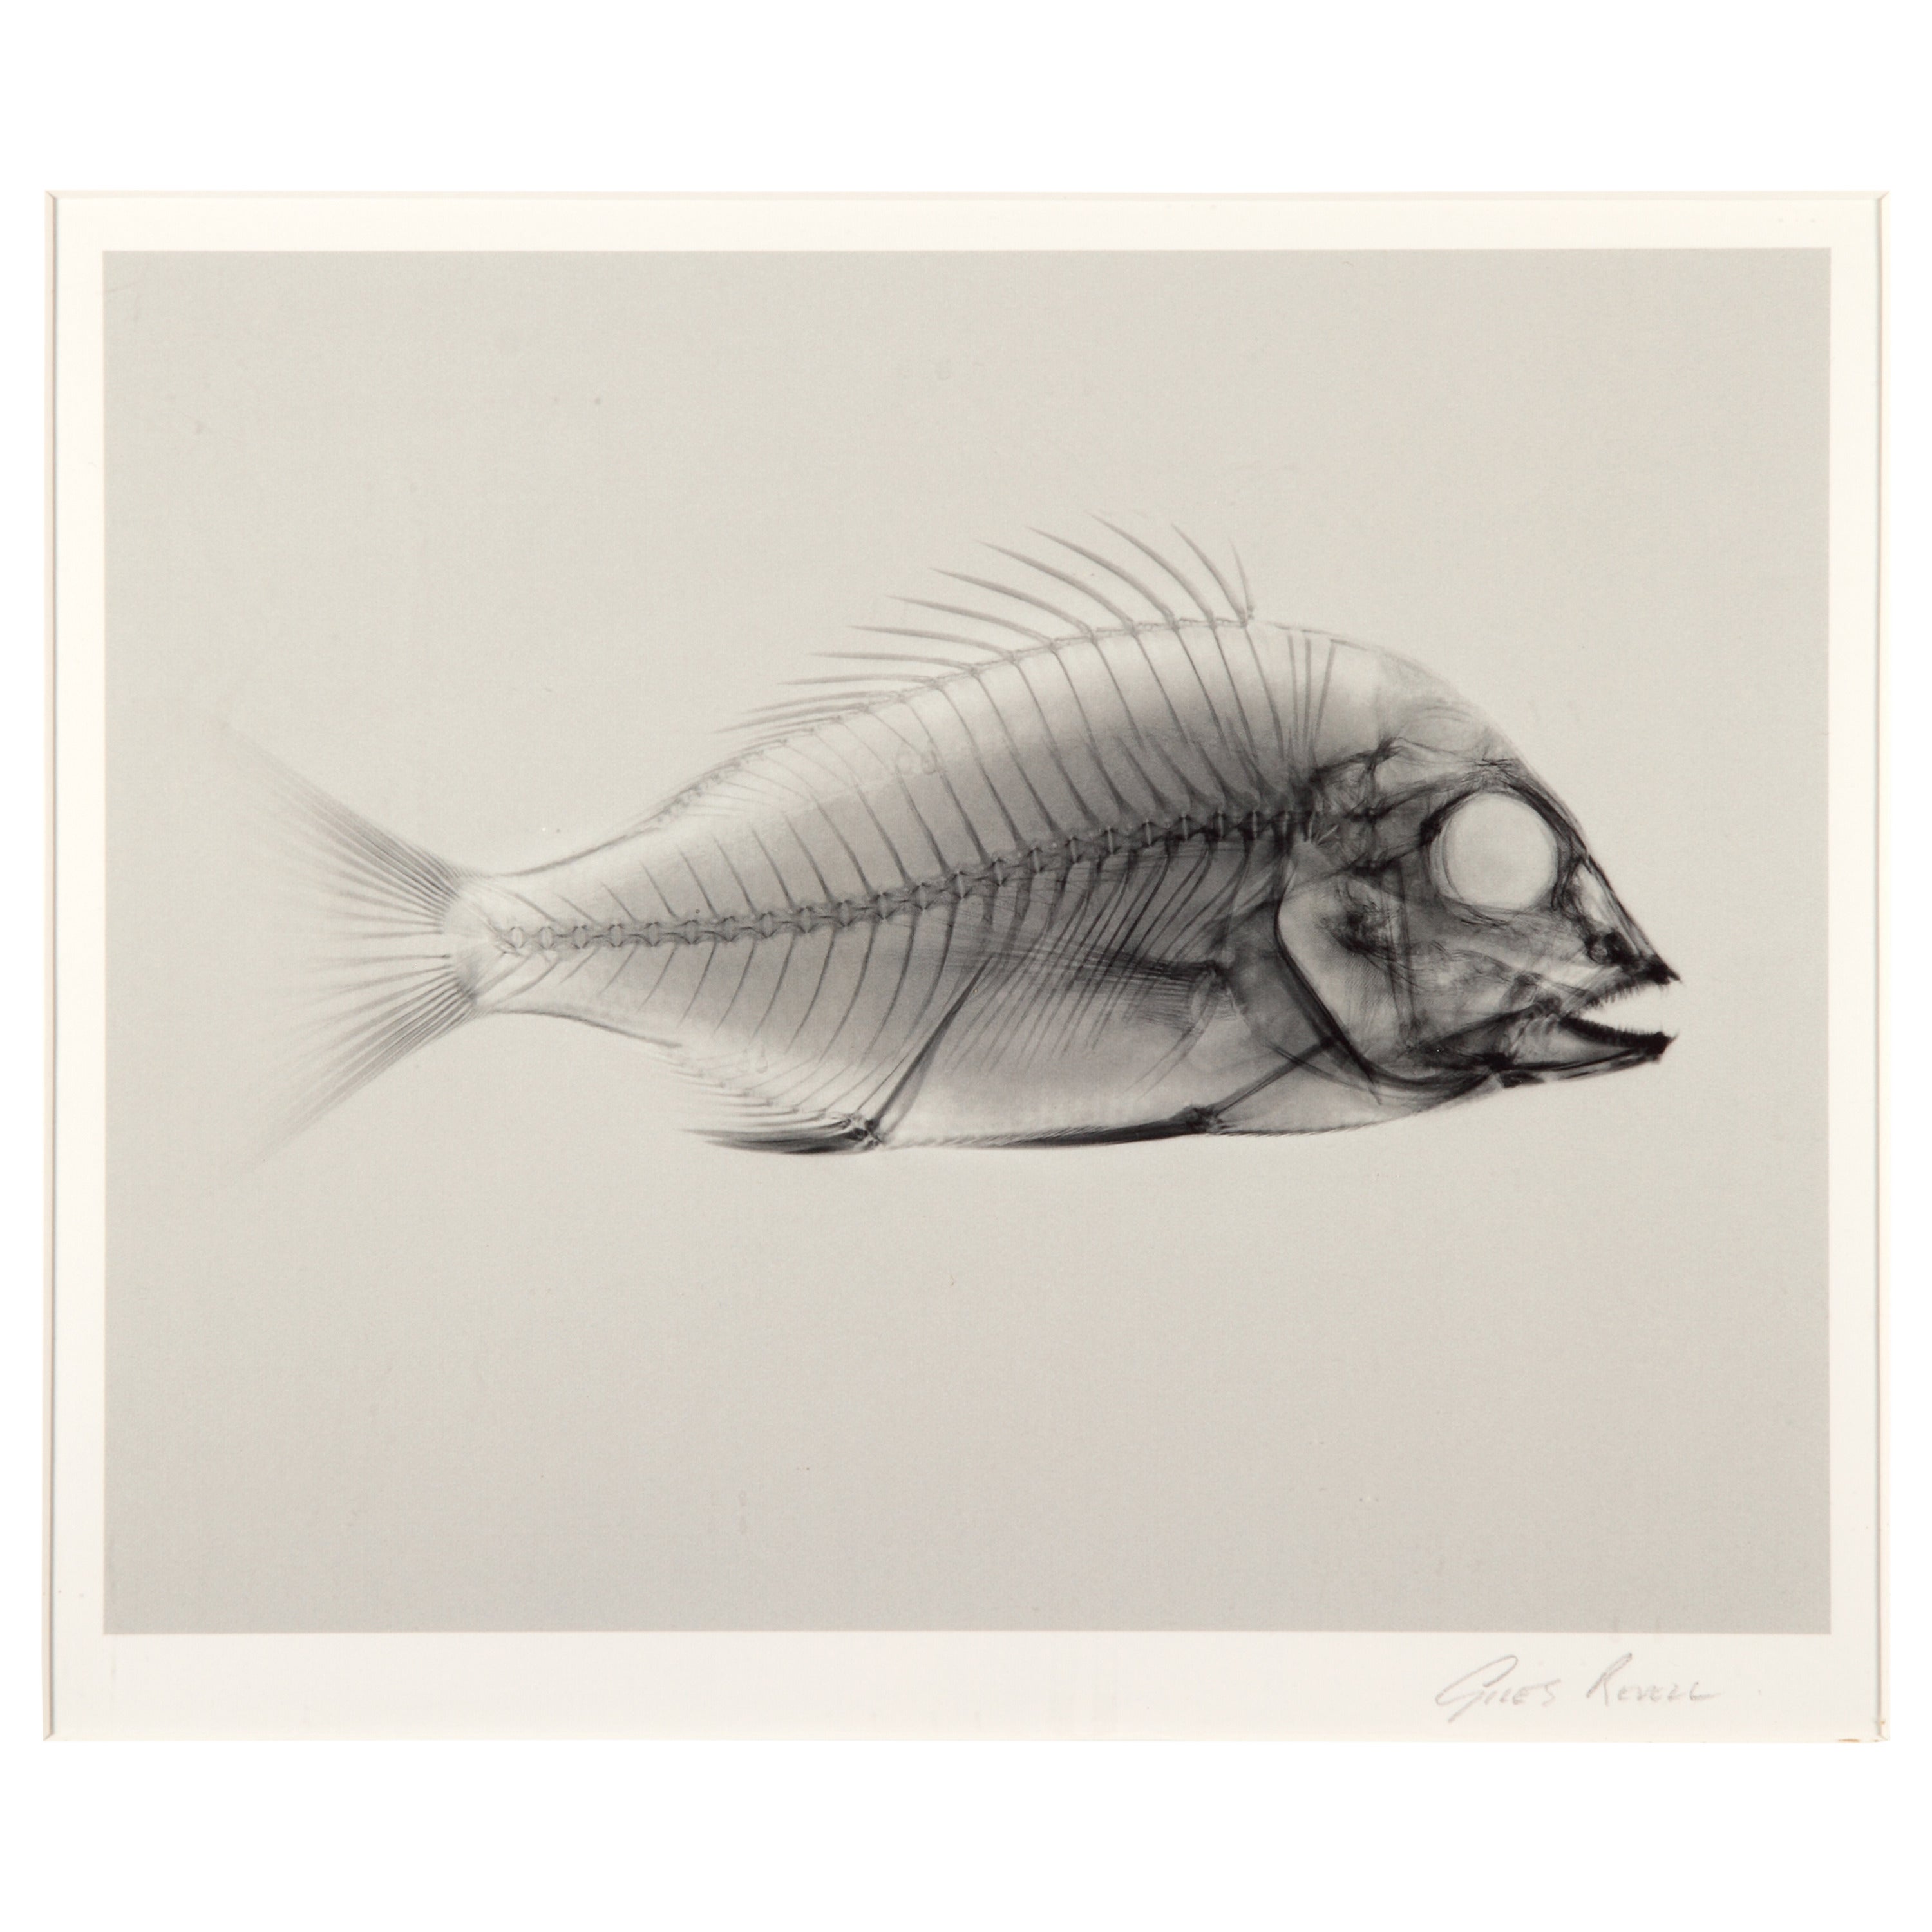 'Fish' Photograph by Giles Revell For Sale